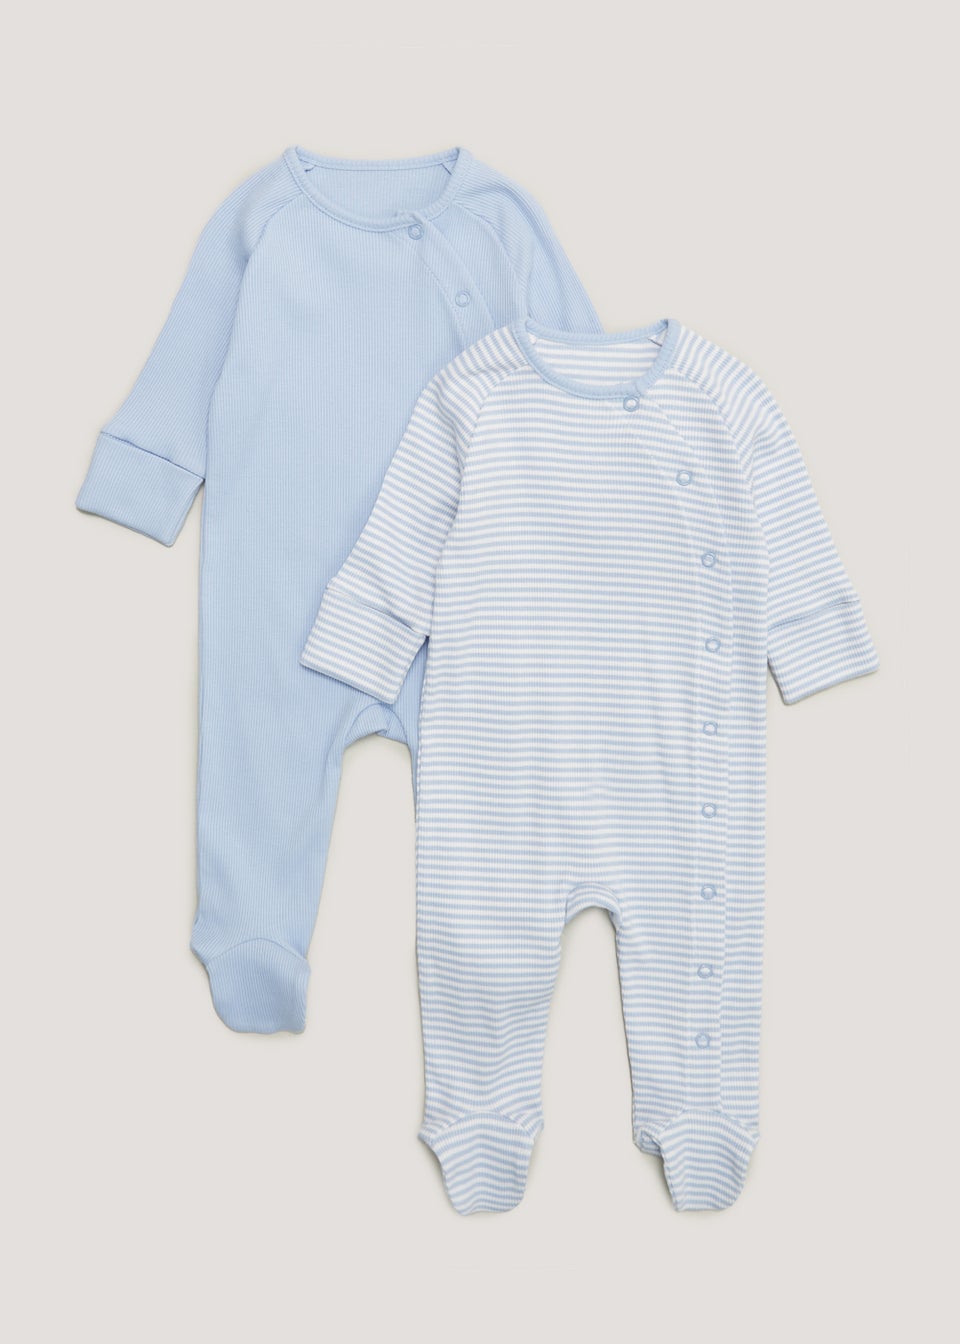 Baby 2 Pack Blue Ribbed Sleepsuits (Newborn-12mths)